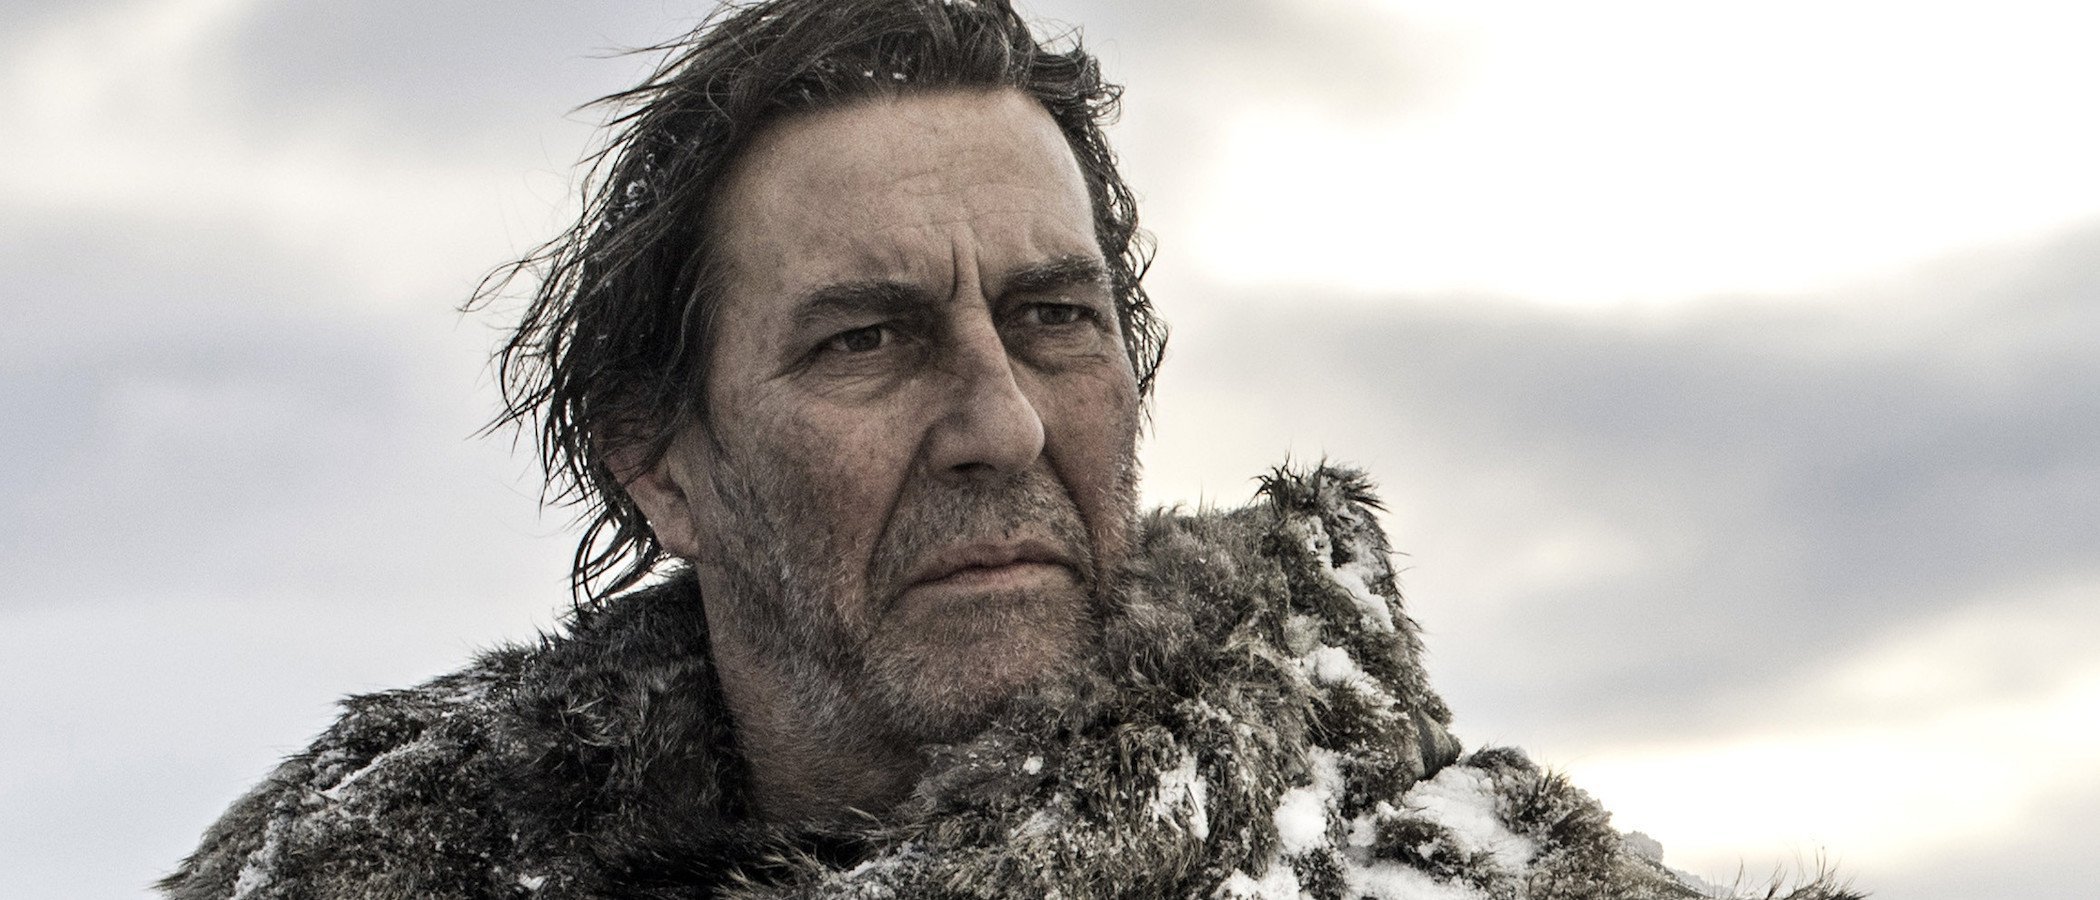 justice-league-ciaran-hinds-mance-rayder-game-of-thrones